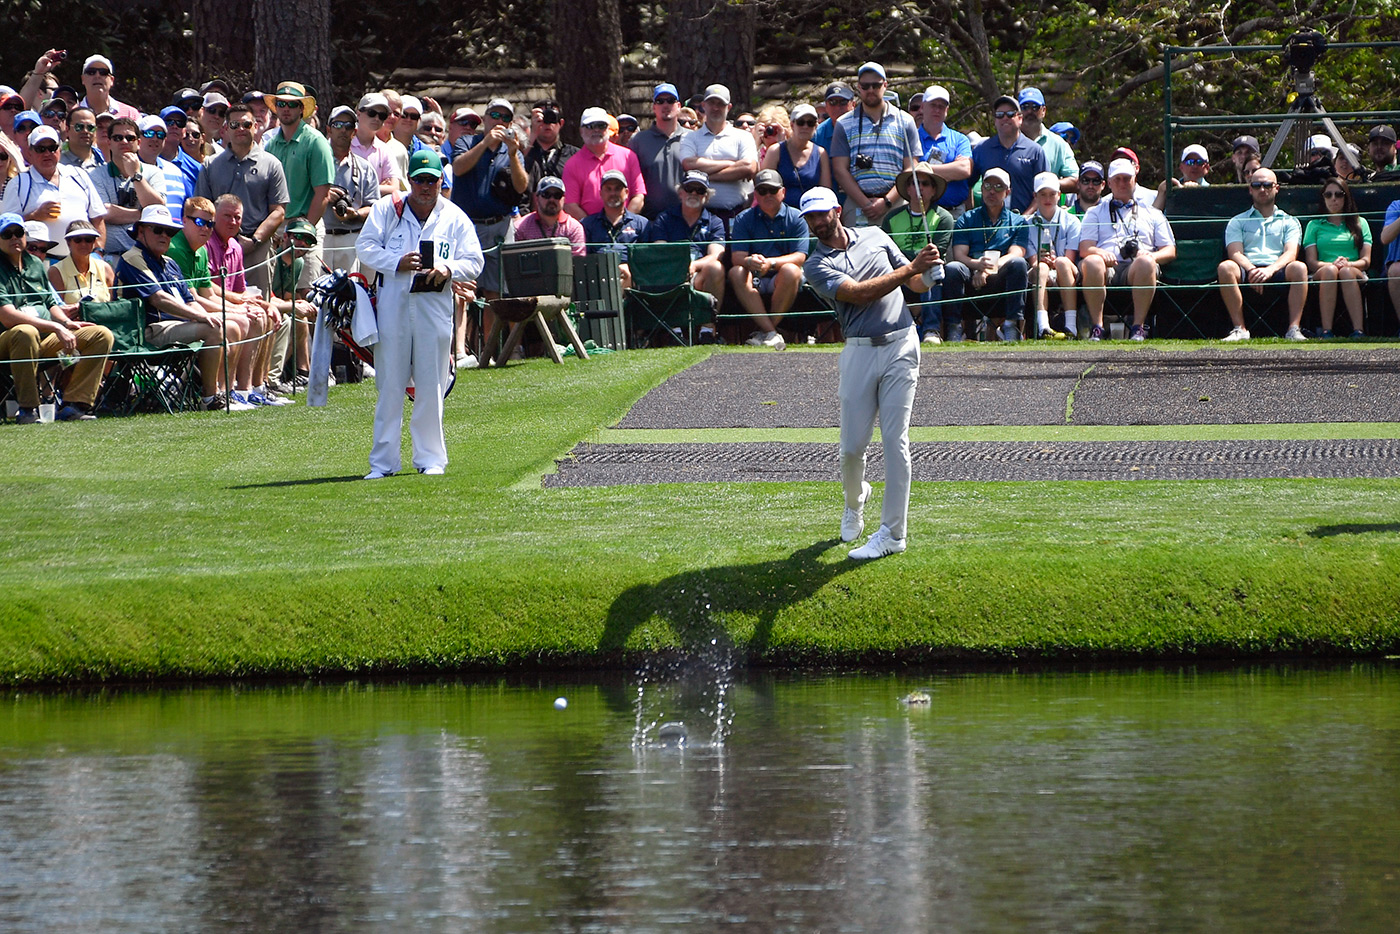 Dustin Johnson skips a shot across the pond at No. 16 during a Masters practice round.